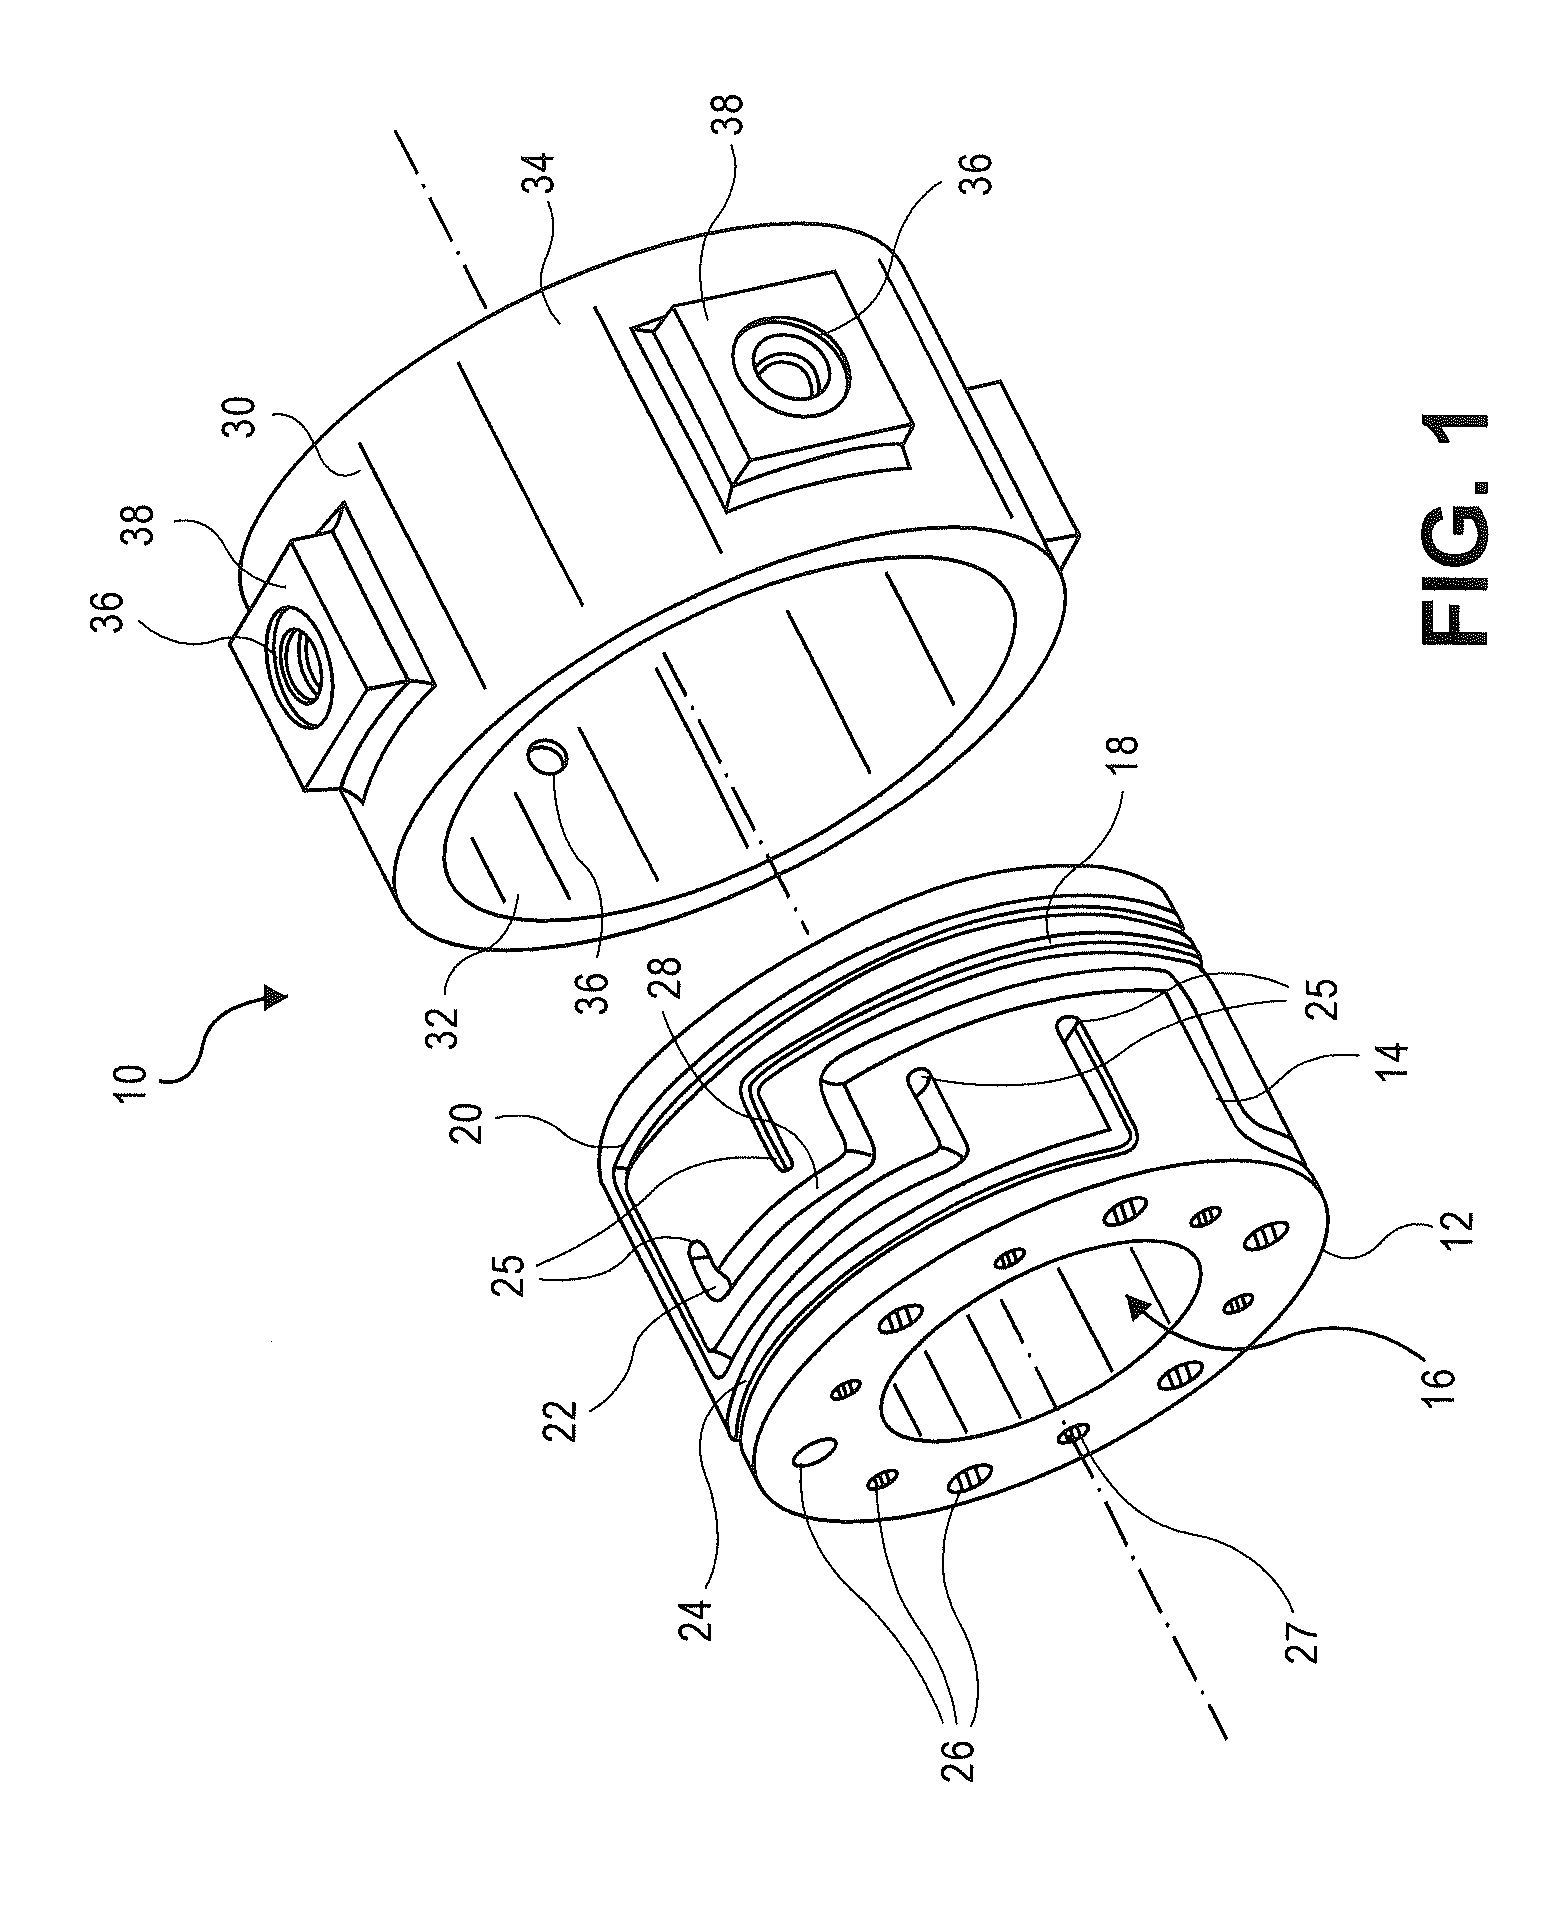 Multi-part, manifold and method of making the manifold